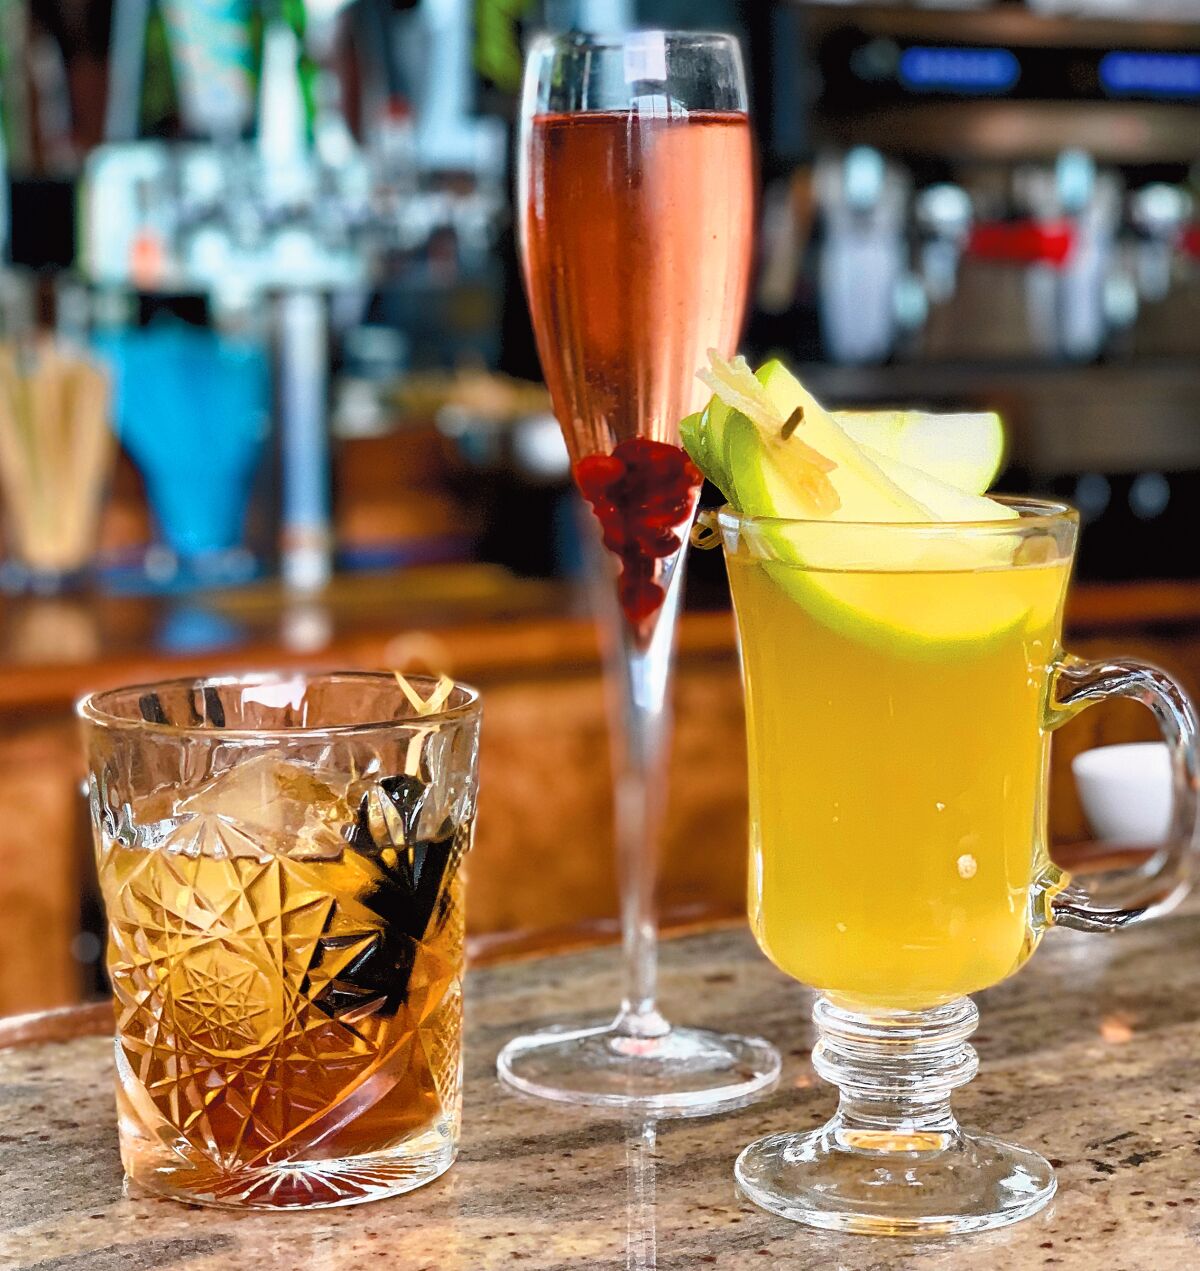 Some of the holiday drinks available at The Marine Room in La Jolla include the PB Old Fashioned, Holiday Sparkler, and Warm Gingered Apple.